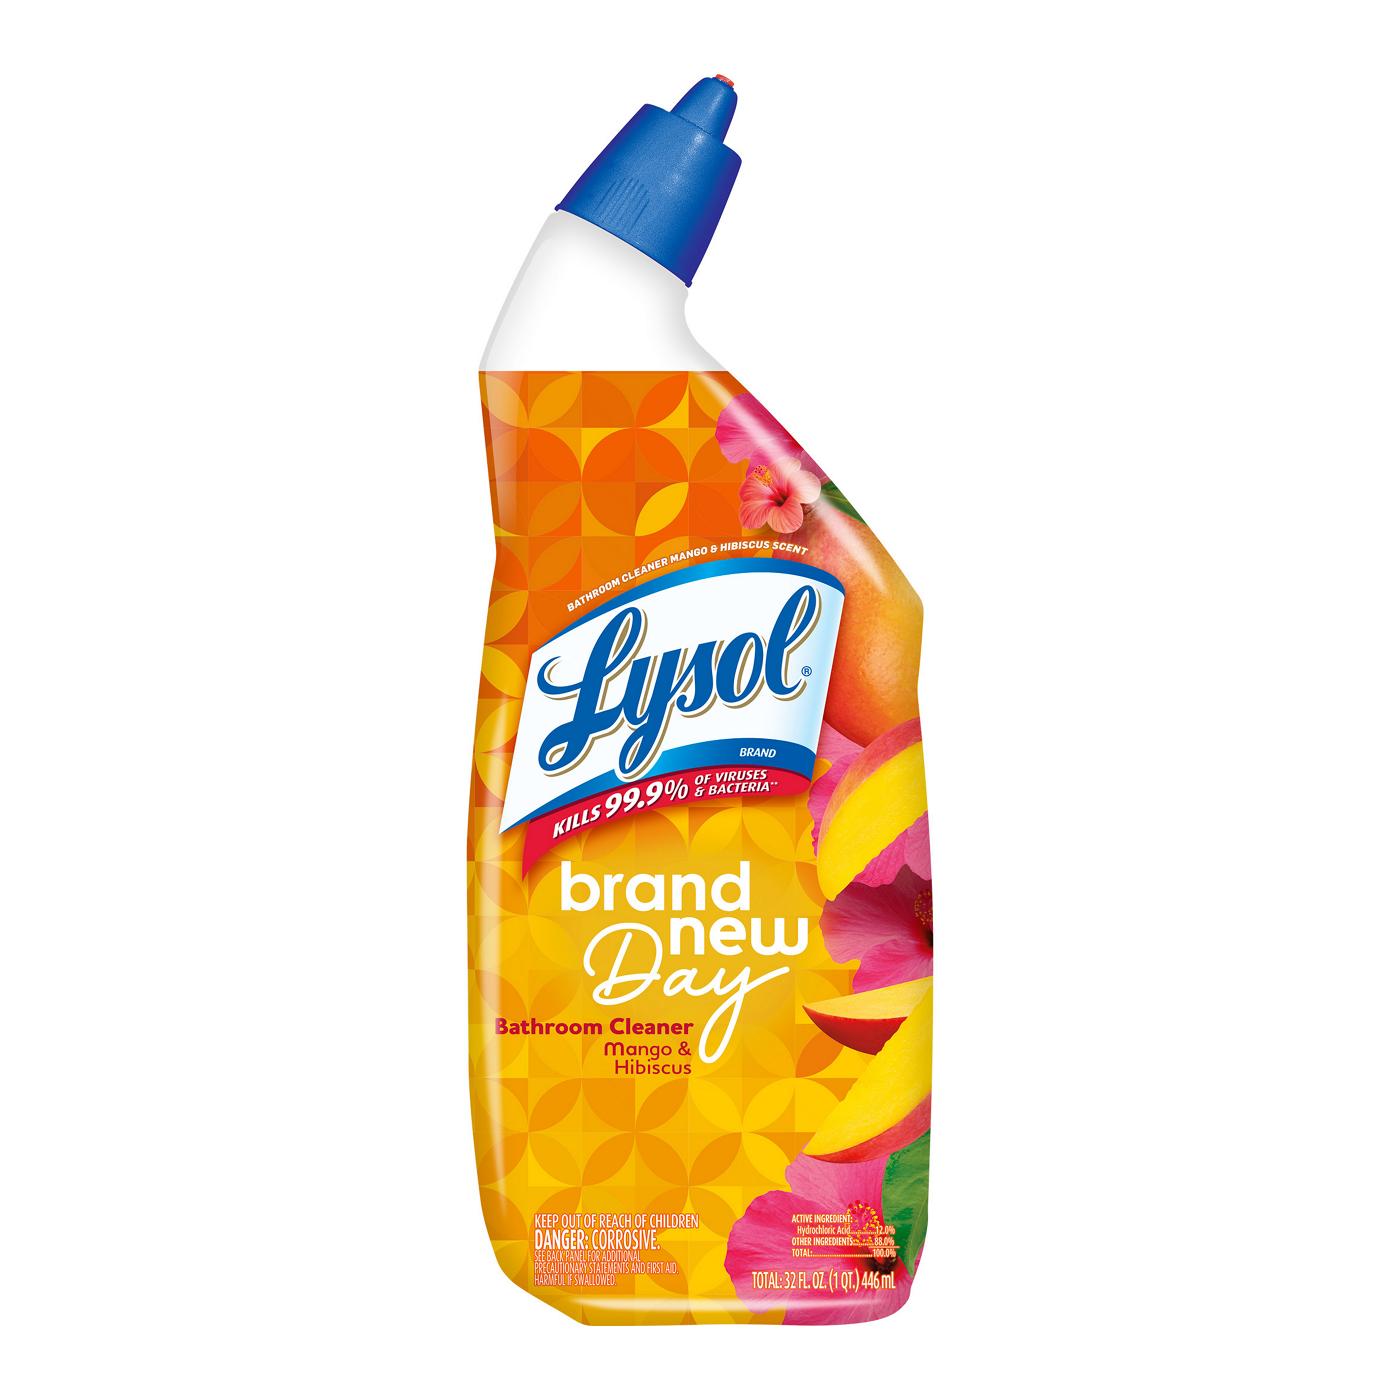 Lysol Brand New Day Mango & Hibiscus Toilet Bowl Cleaner; image 1 of 2